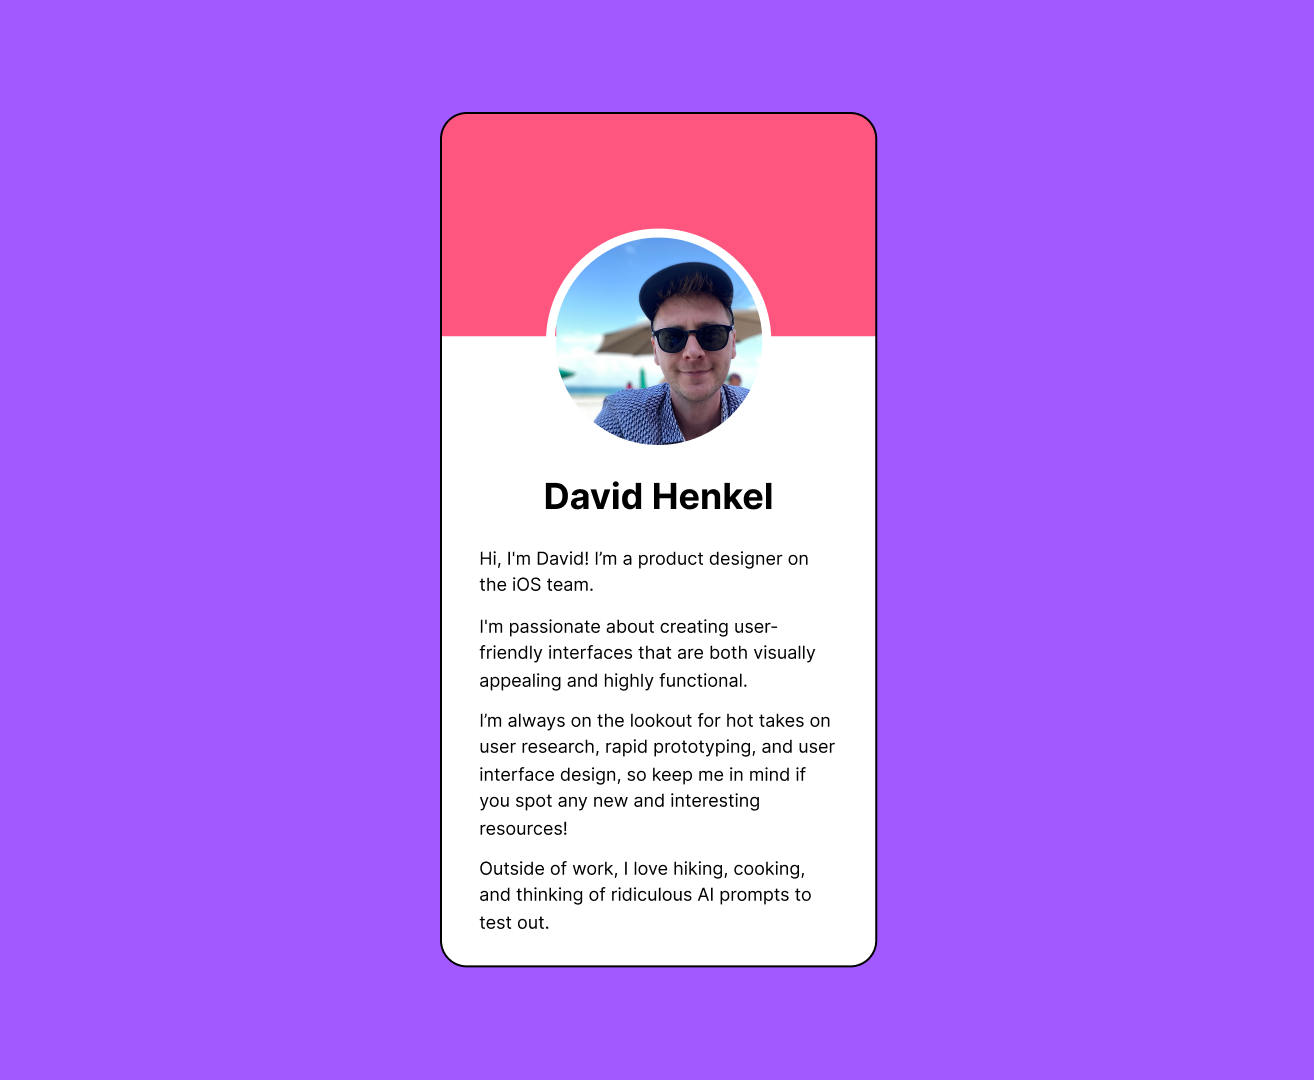 A complete rectangular profile card with an avatar, name, and description